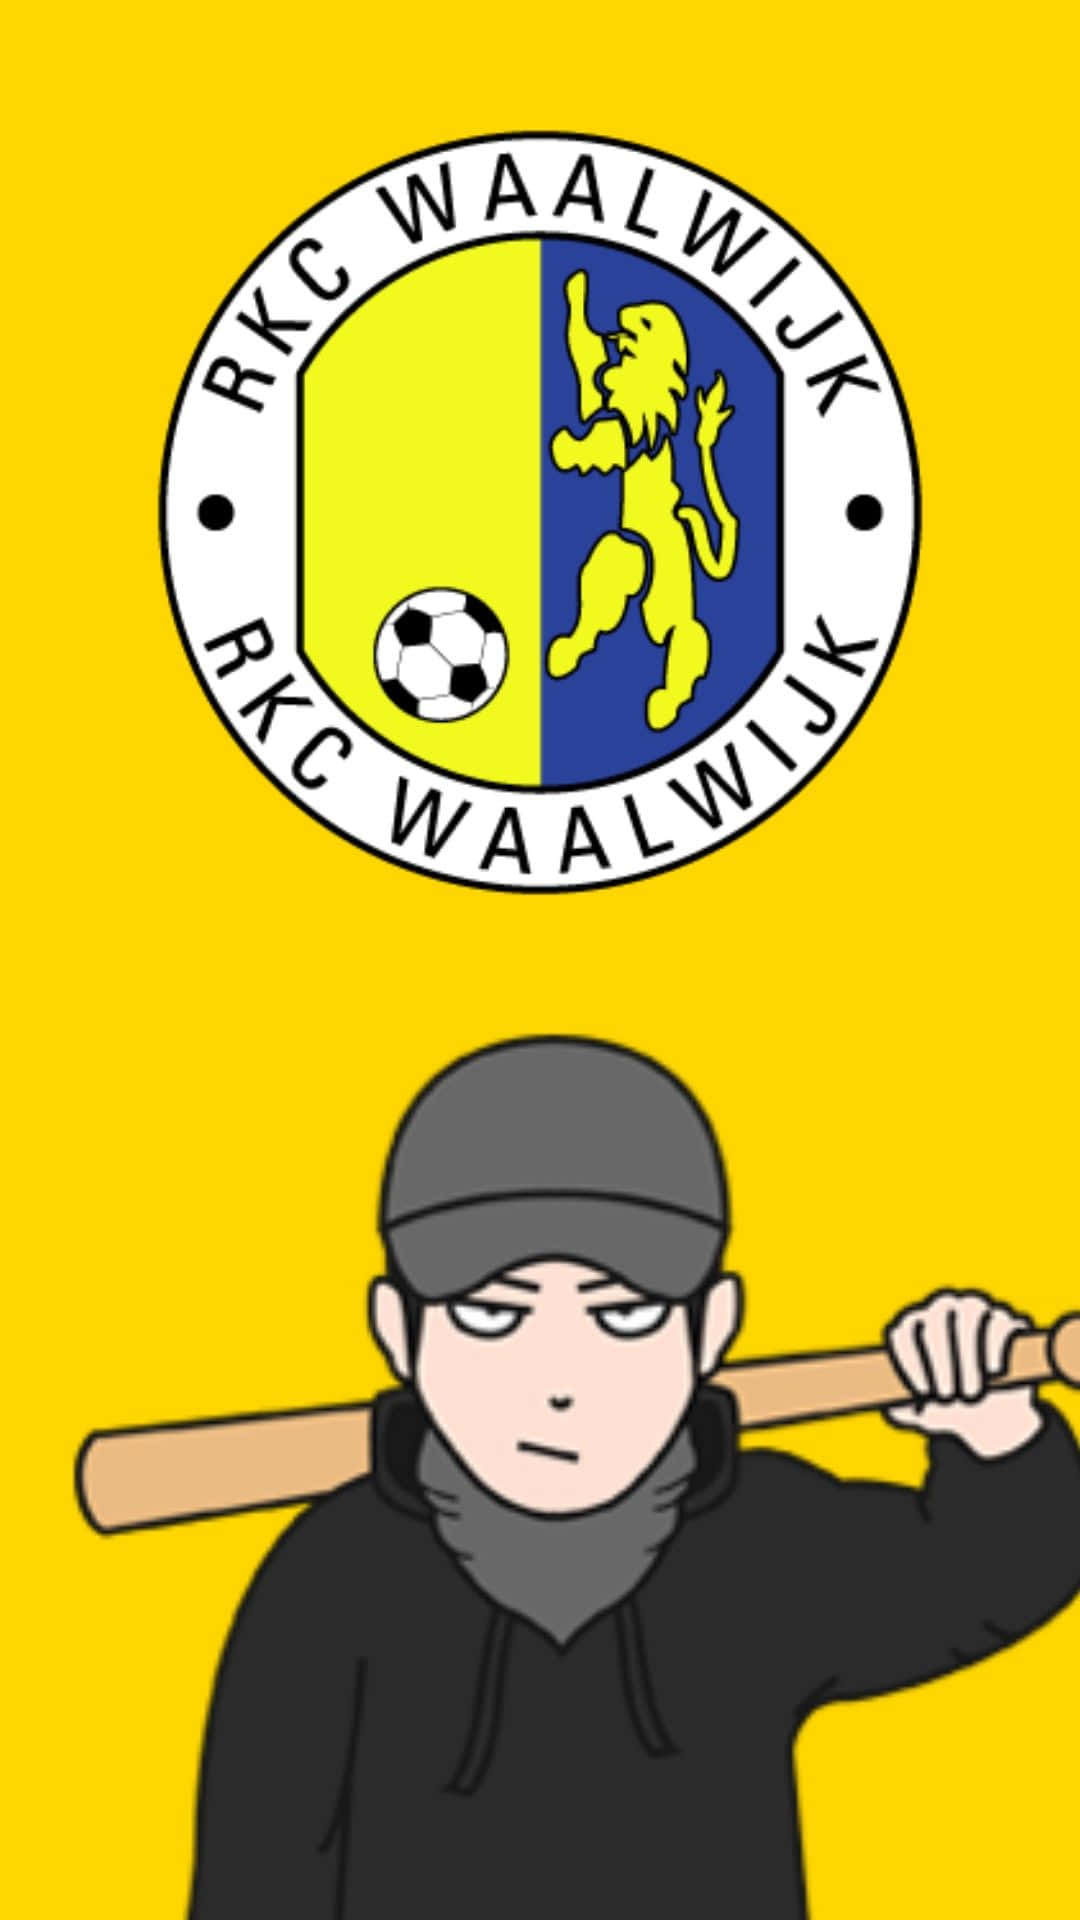 The iconic RKC Waalwijk soccer team in the Netherlands Wallpaper